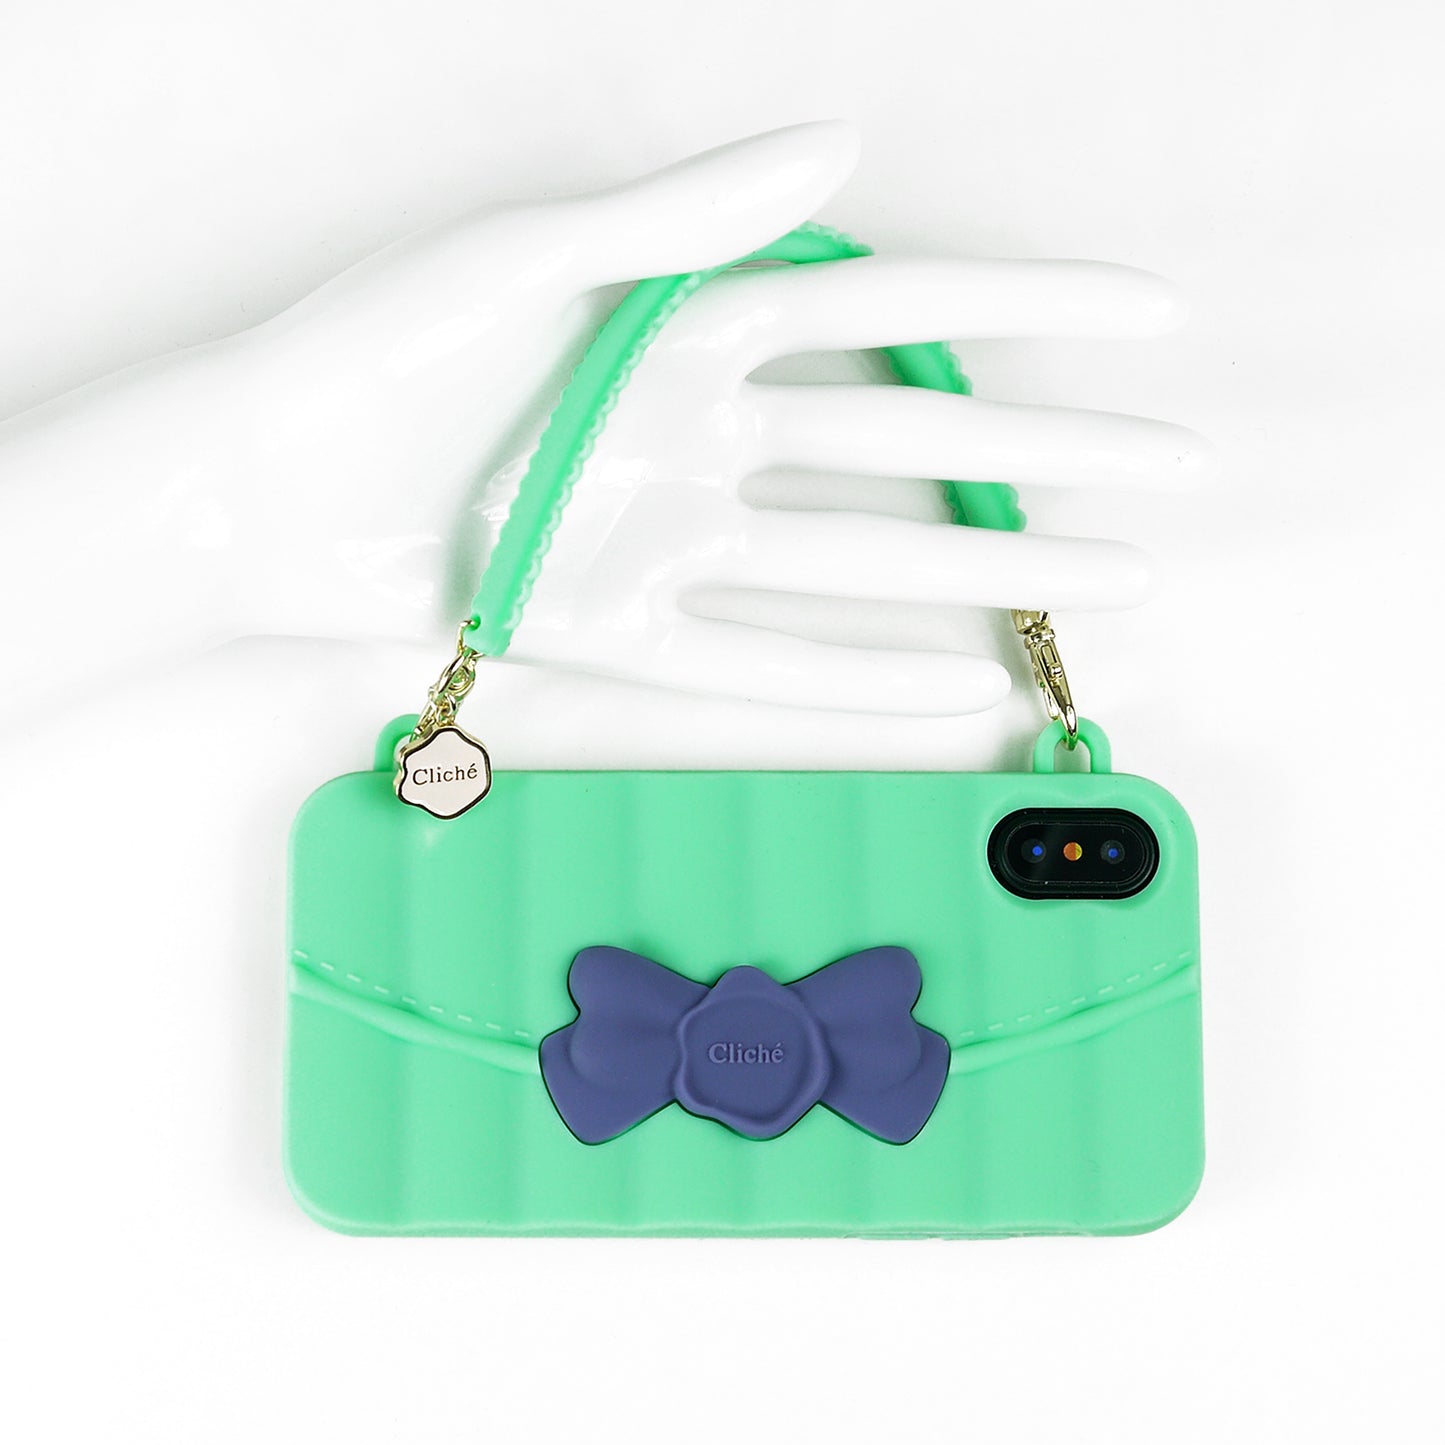 iPhone X/Xs Case - Matelasse (Green with Blue Ribbon)